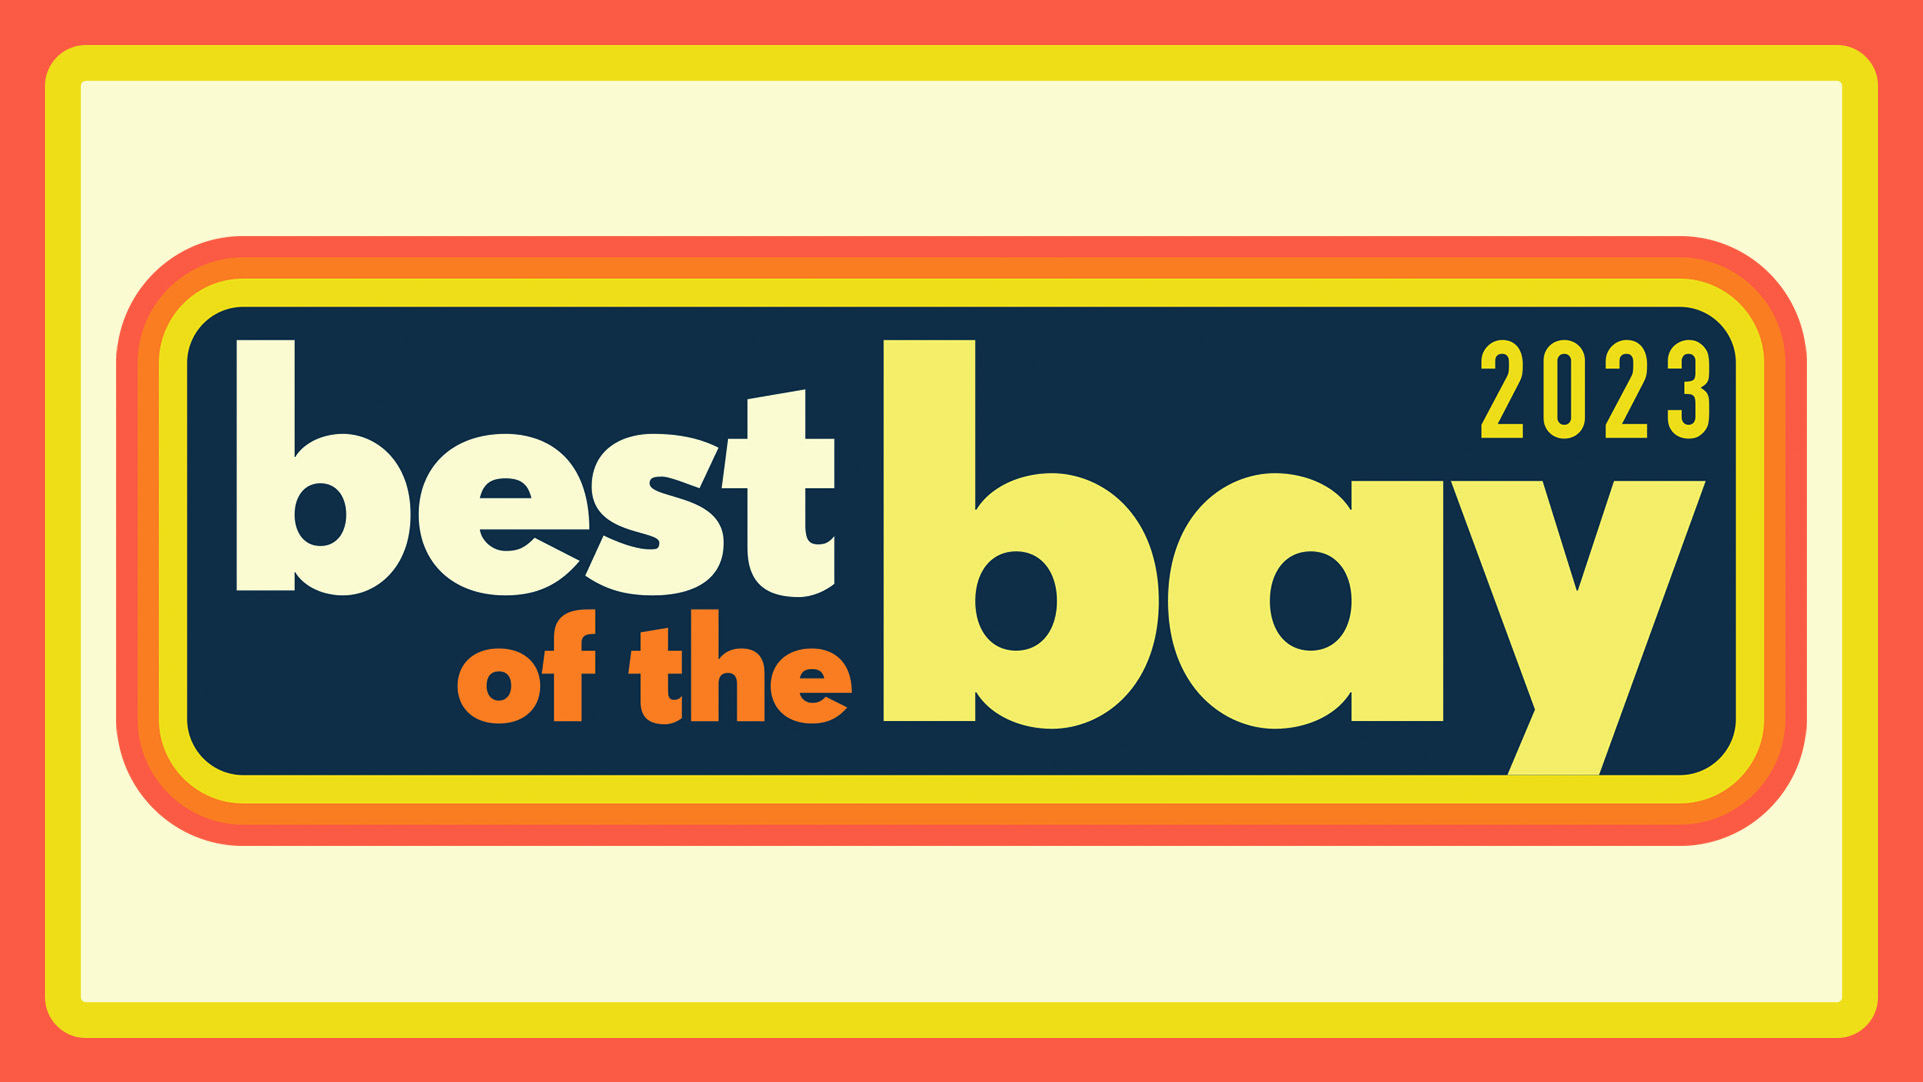 Creative Loafing Tampa's Best of the Bay 2023